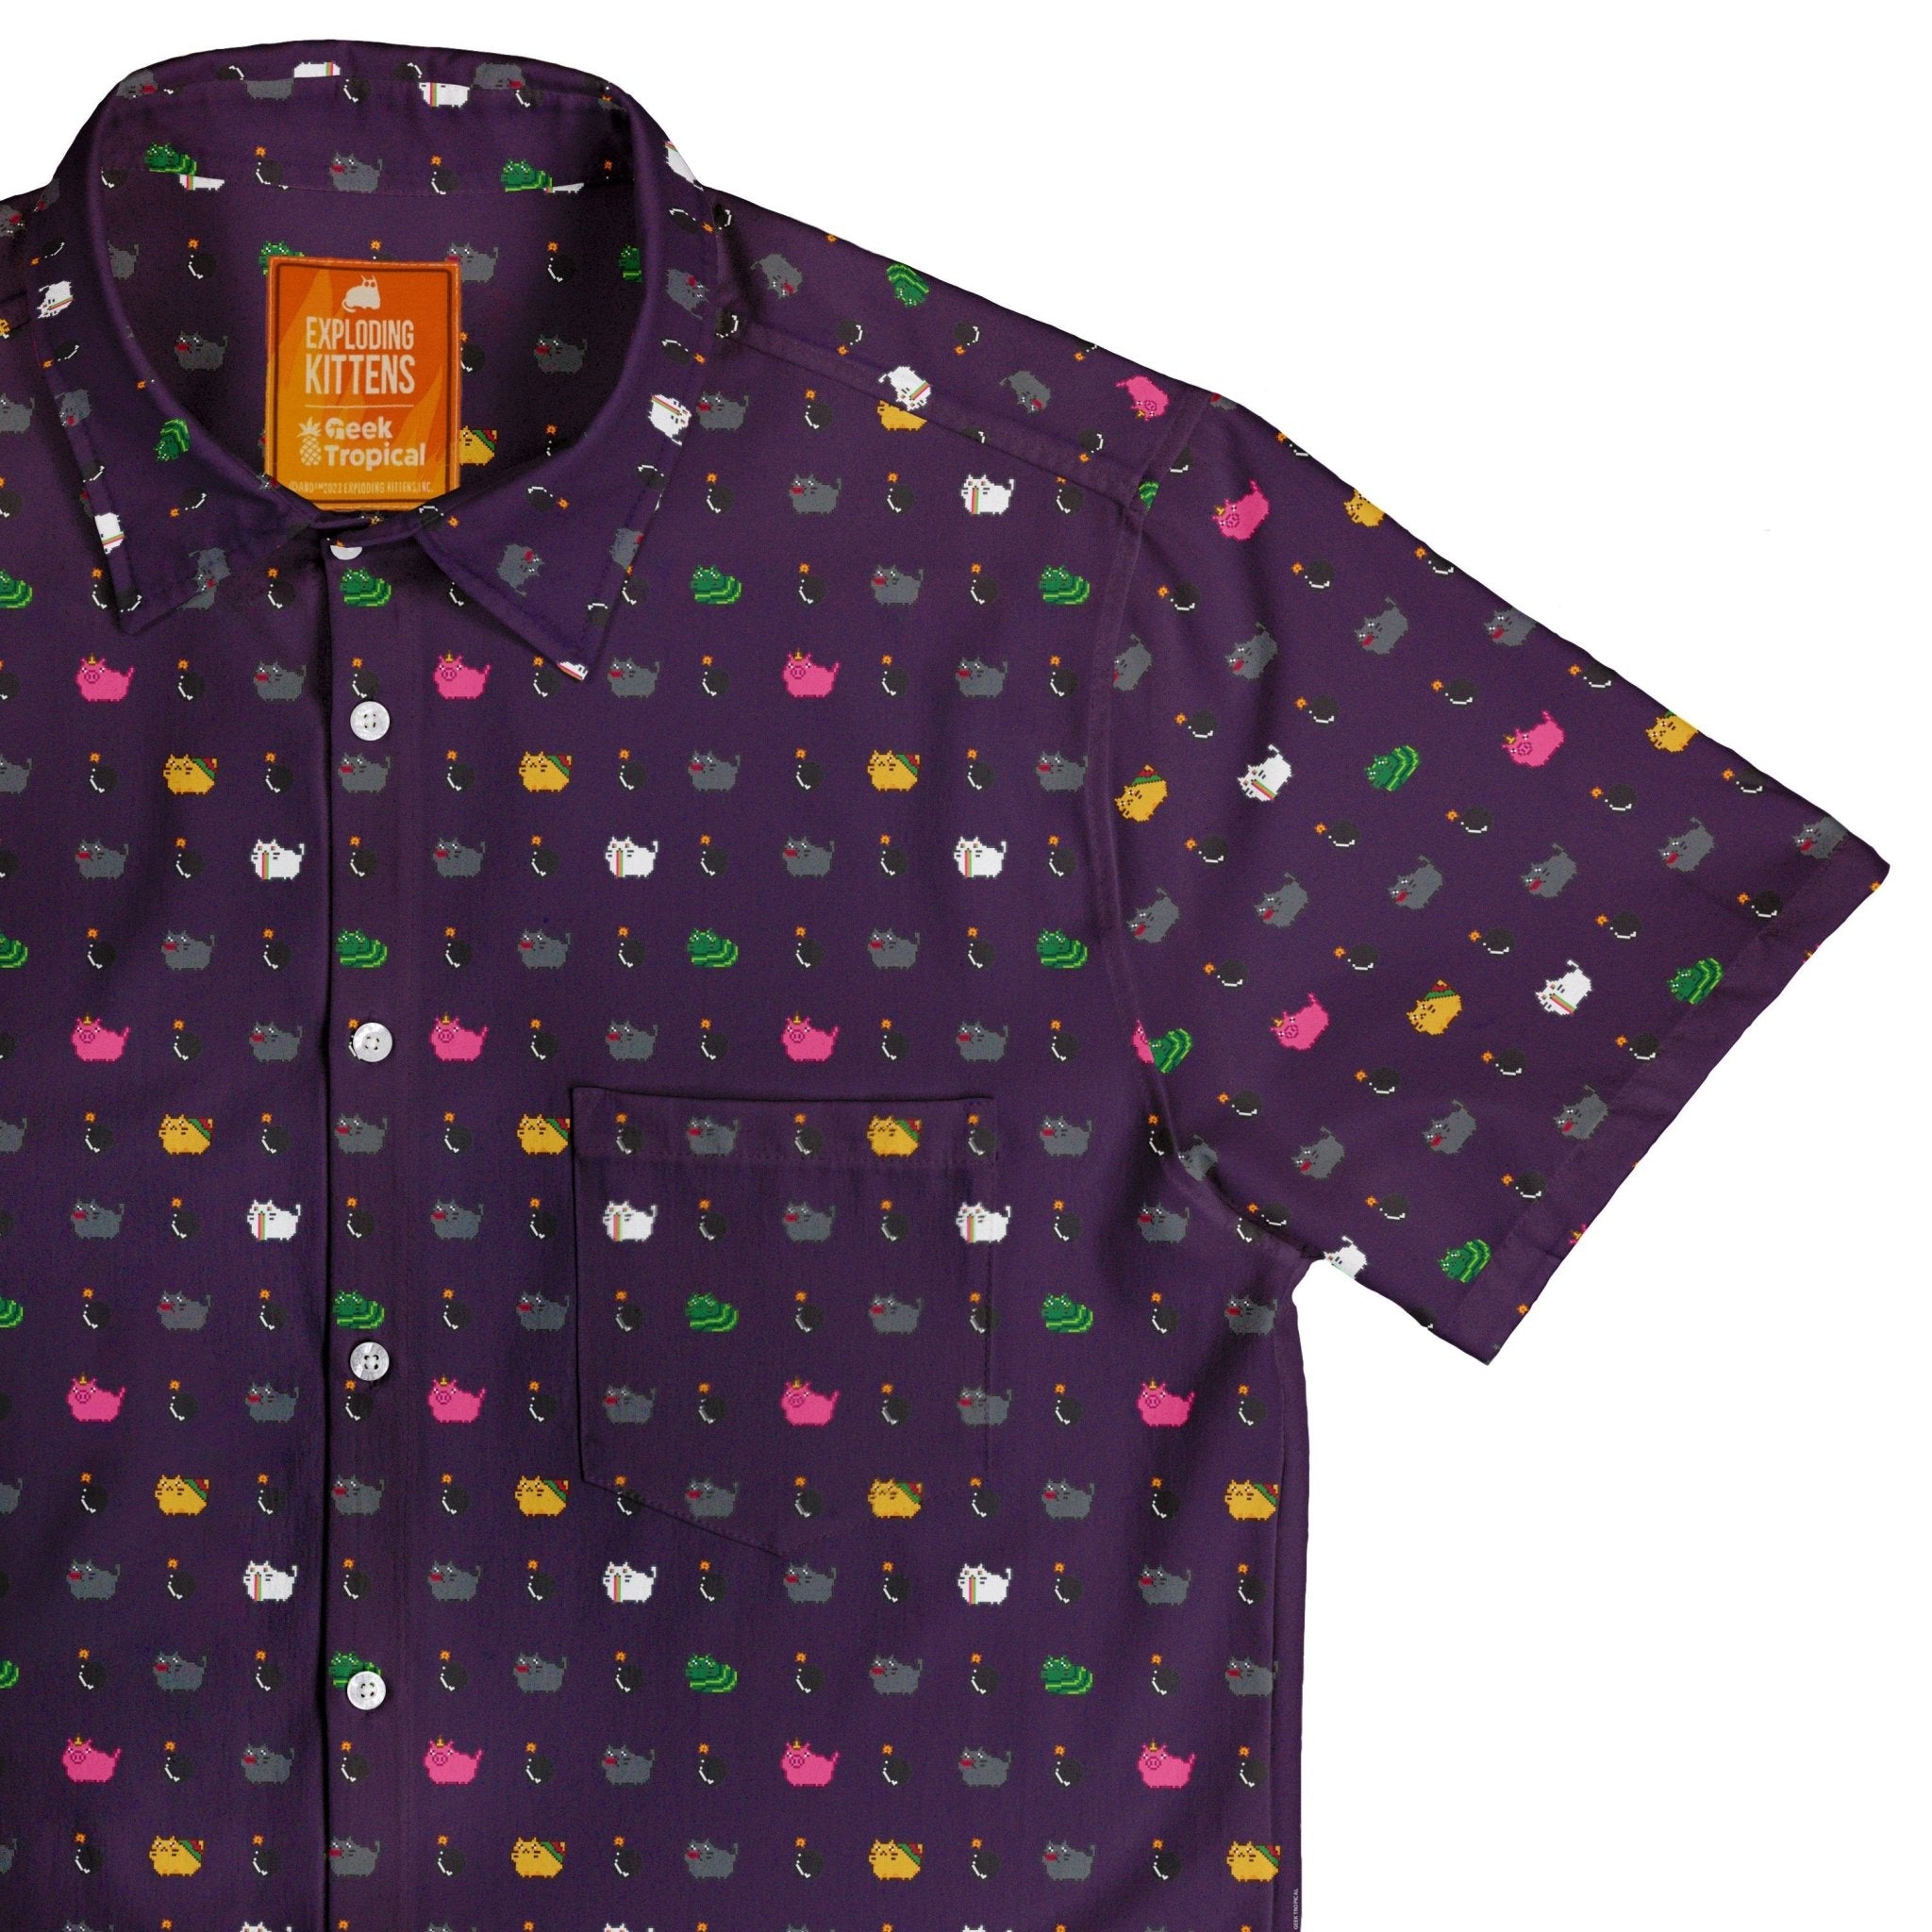 Exploding Kittens Pixel Cats Dark Button Up Shirt - adult sizing - Animal Patterns - board game print